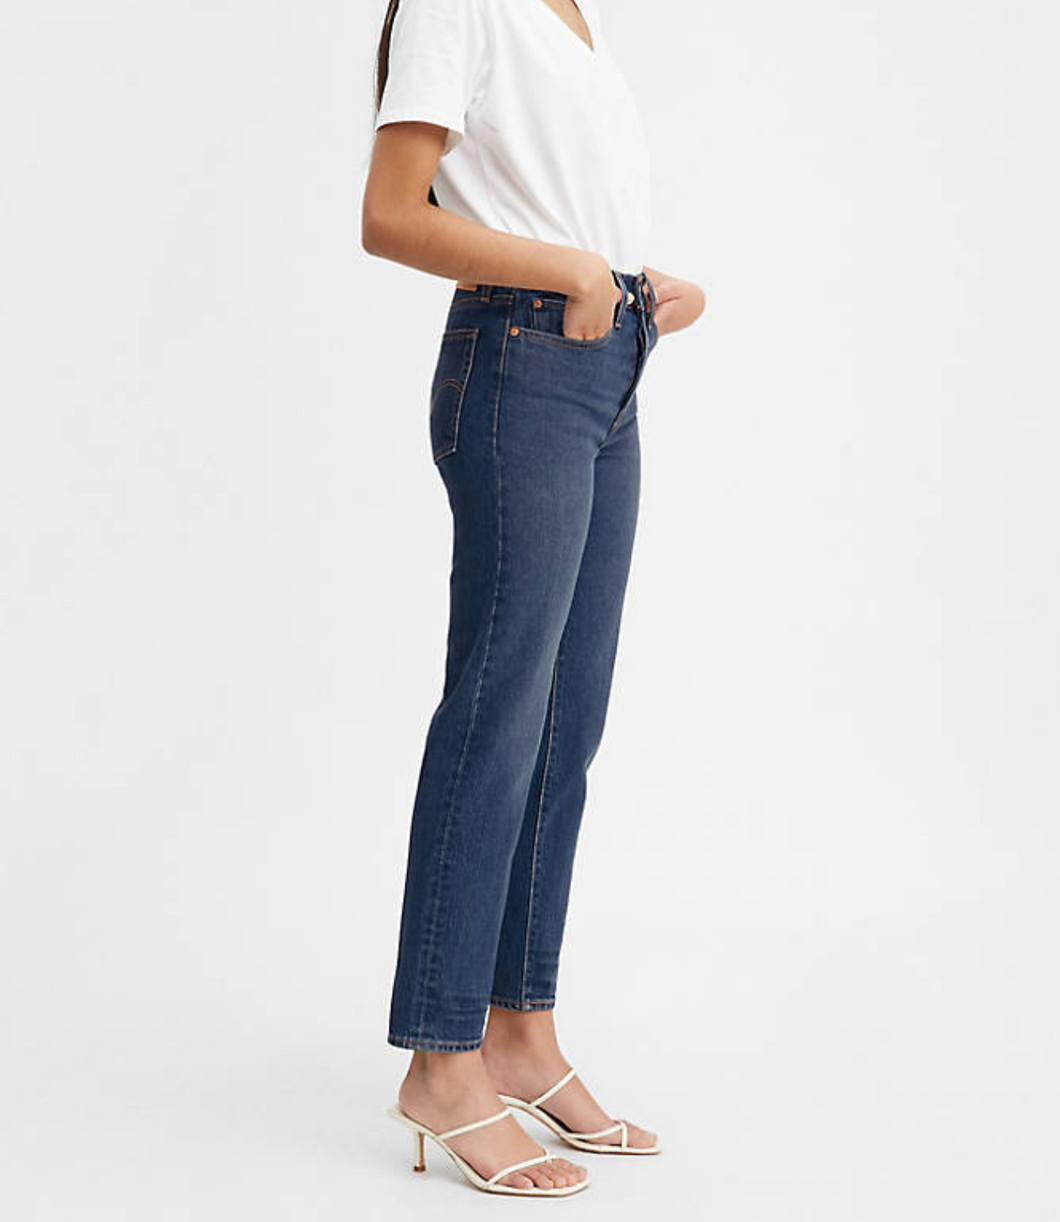 Levi's Wedgie Fit Ankle